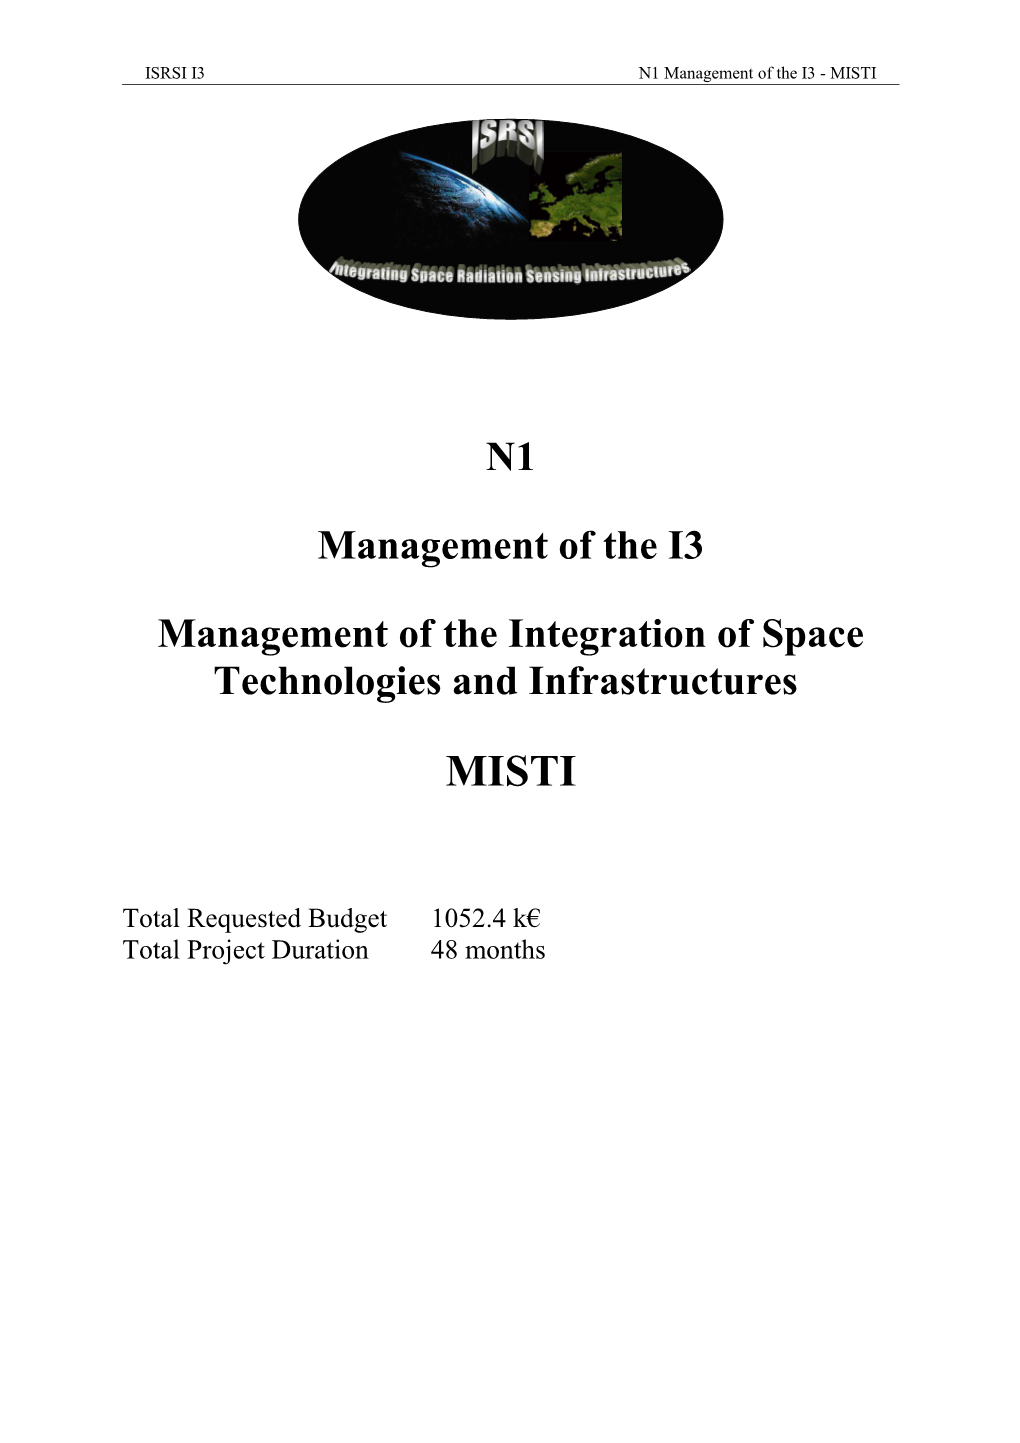 Management of the Integration of Space Technologies and Infrastructures